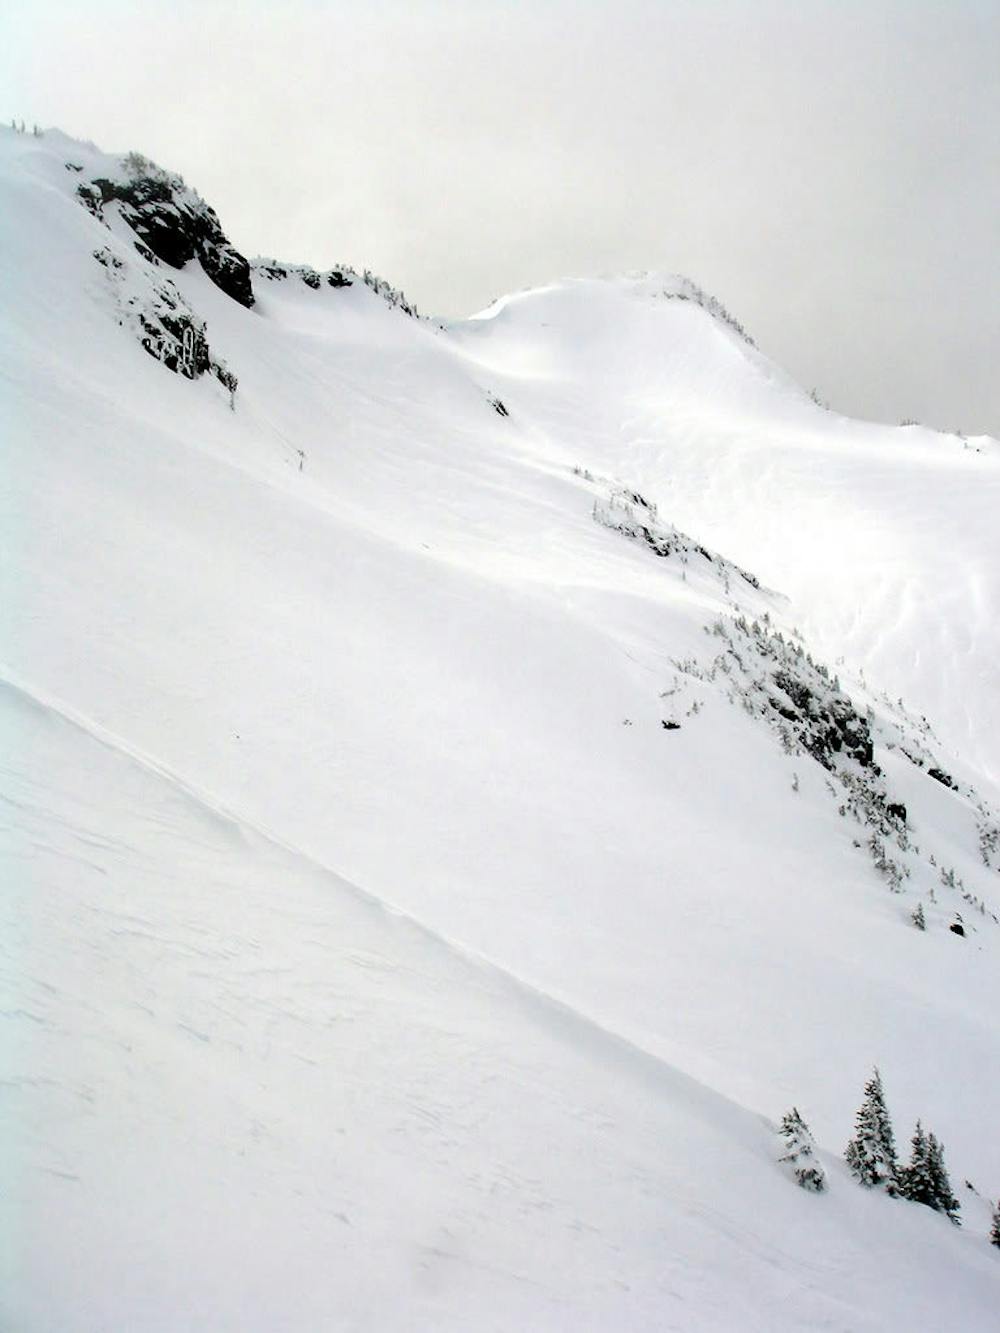 Looking at the open North Slopes of Fay Peak